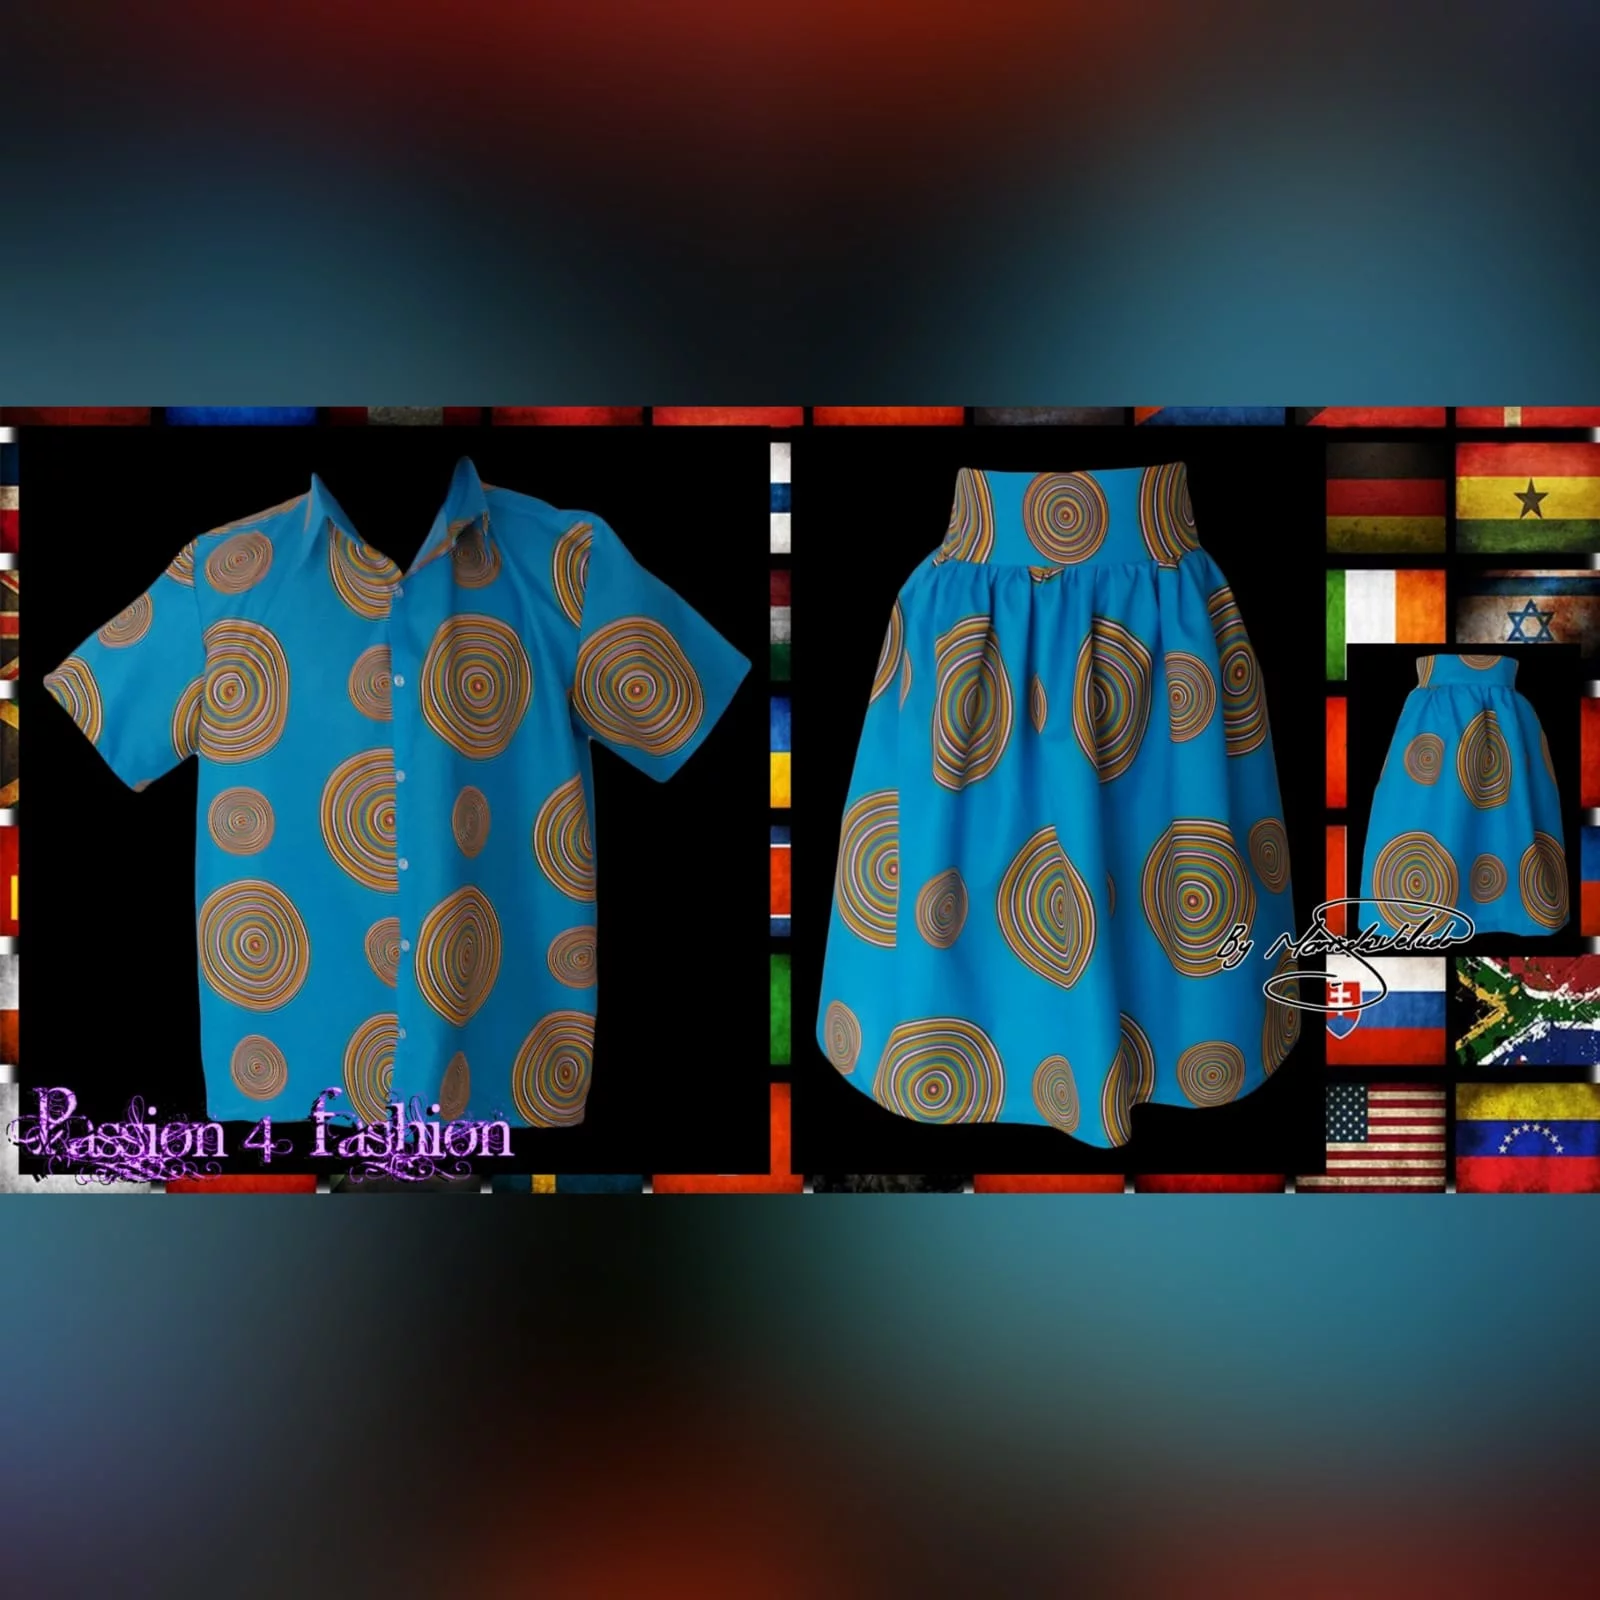 Matching venda traditional outfits for the family 1 venda traditional matching family items. Ladies high waisted skirt and girls matching skirt. With men's matching shirt.